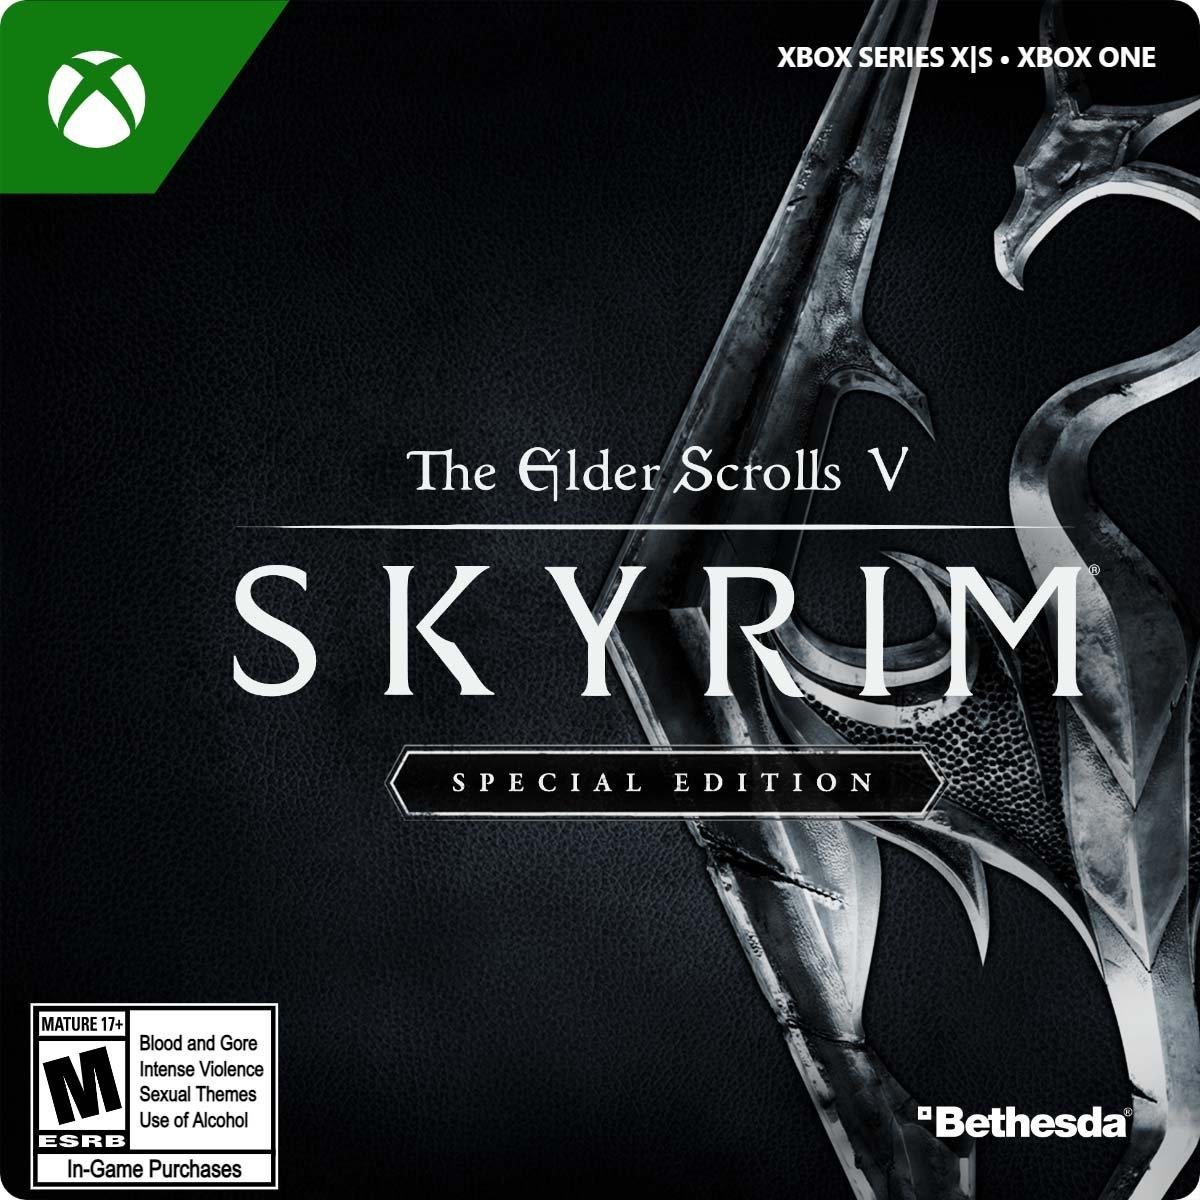 Detective Aarzelen Afname The Elder Scrolls V: Skyrim Special Edition - Xbox One | Xbox One | GameStop